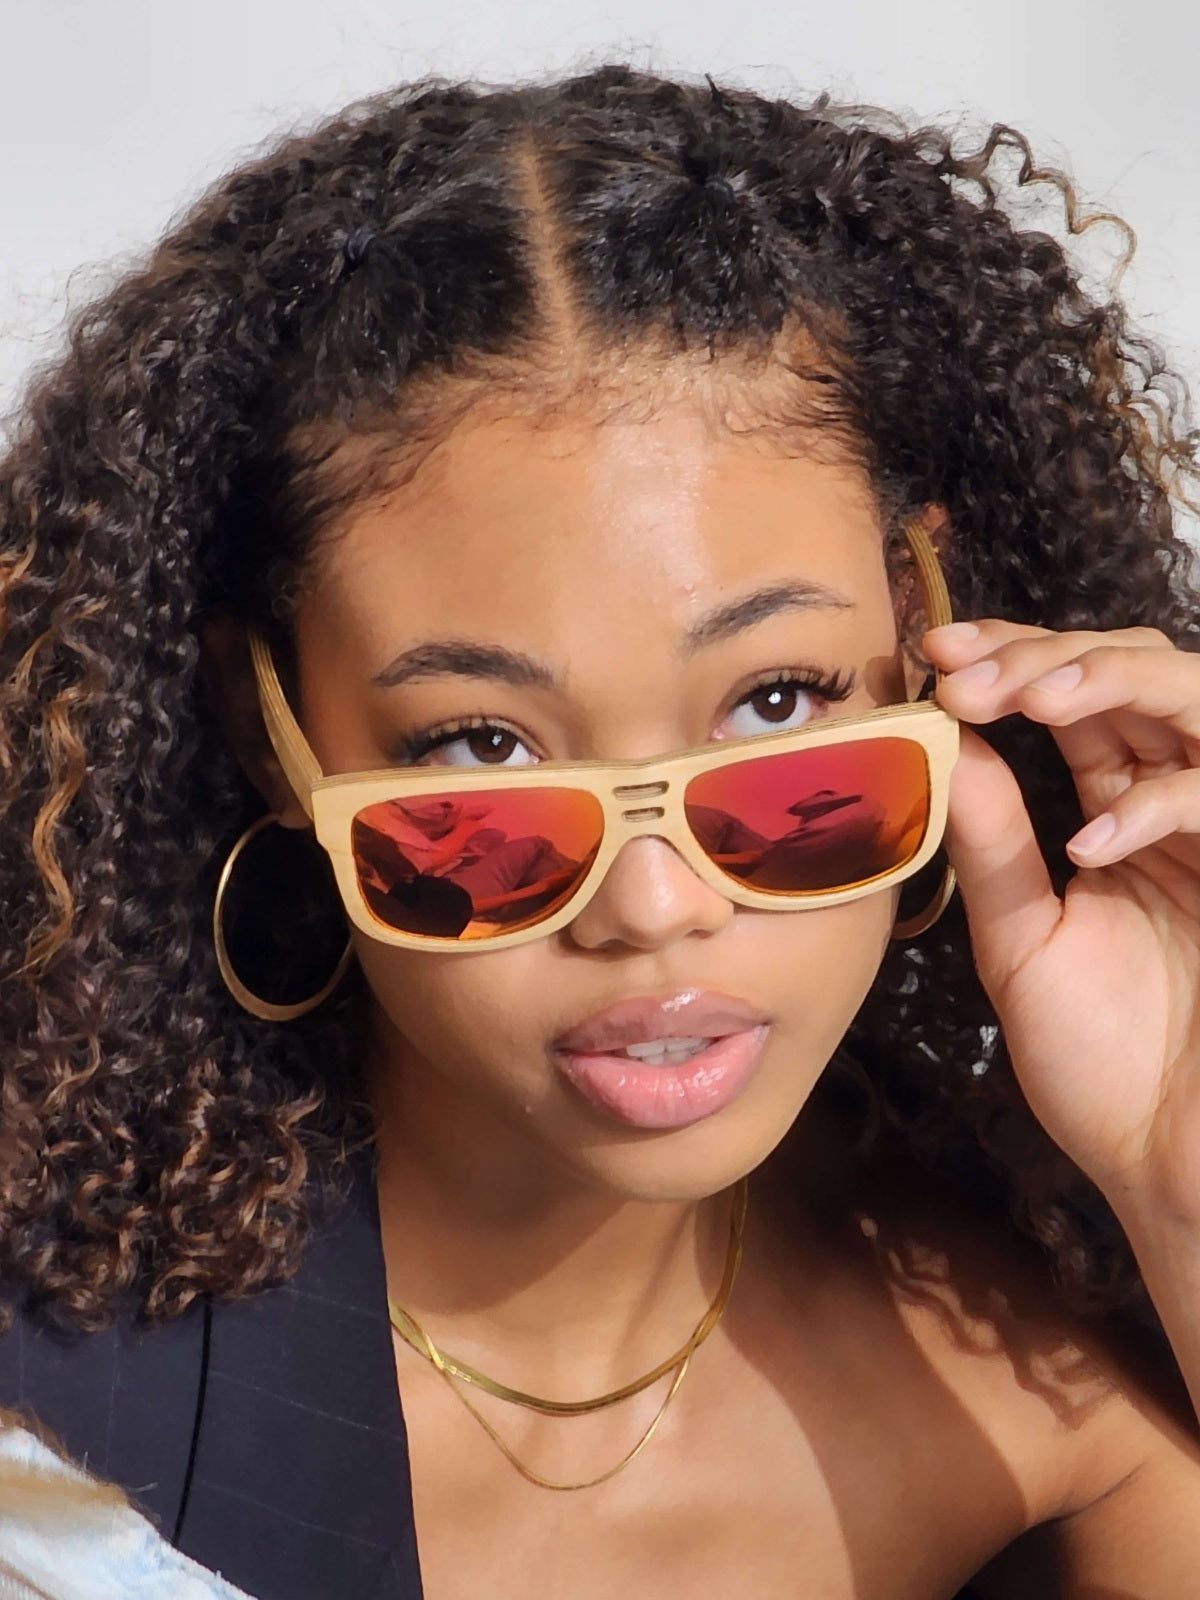 A woman with curly hair wearing wooden sunglasses, exuding style and confidence.